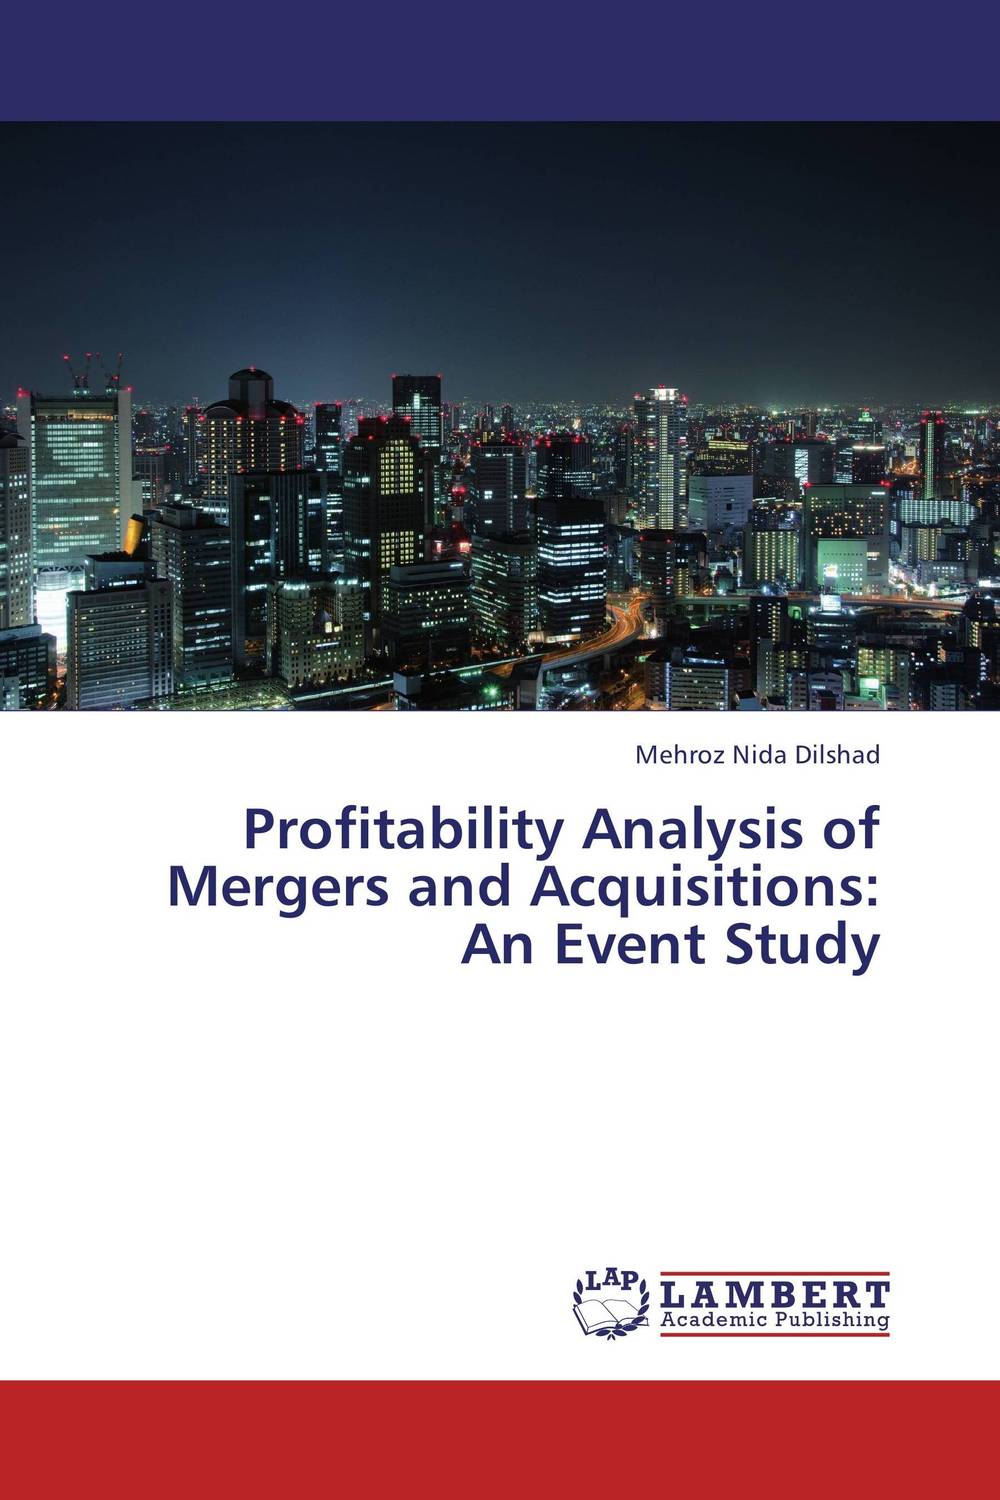 Profitability Analysis of Mergers and Acquisitions: An Event Study